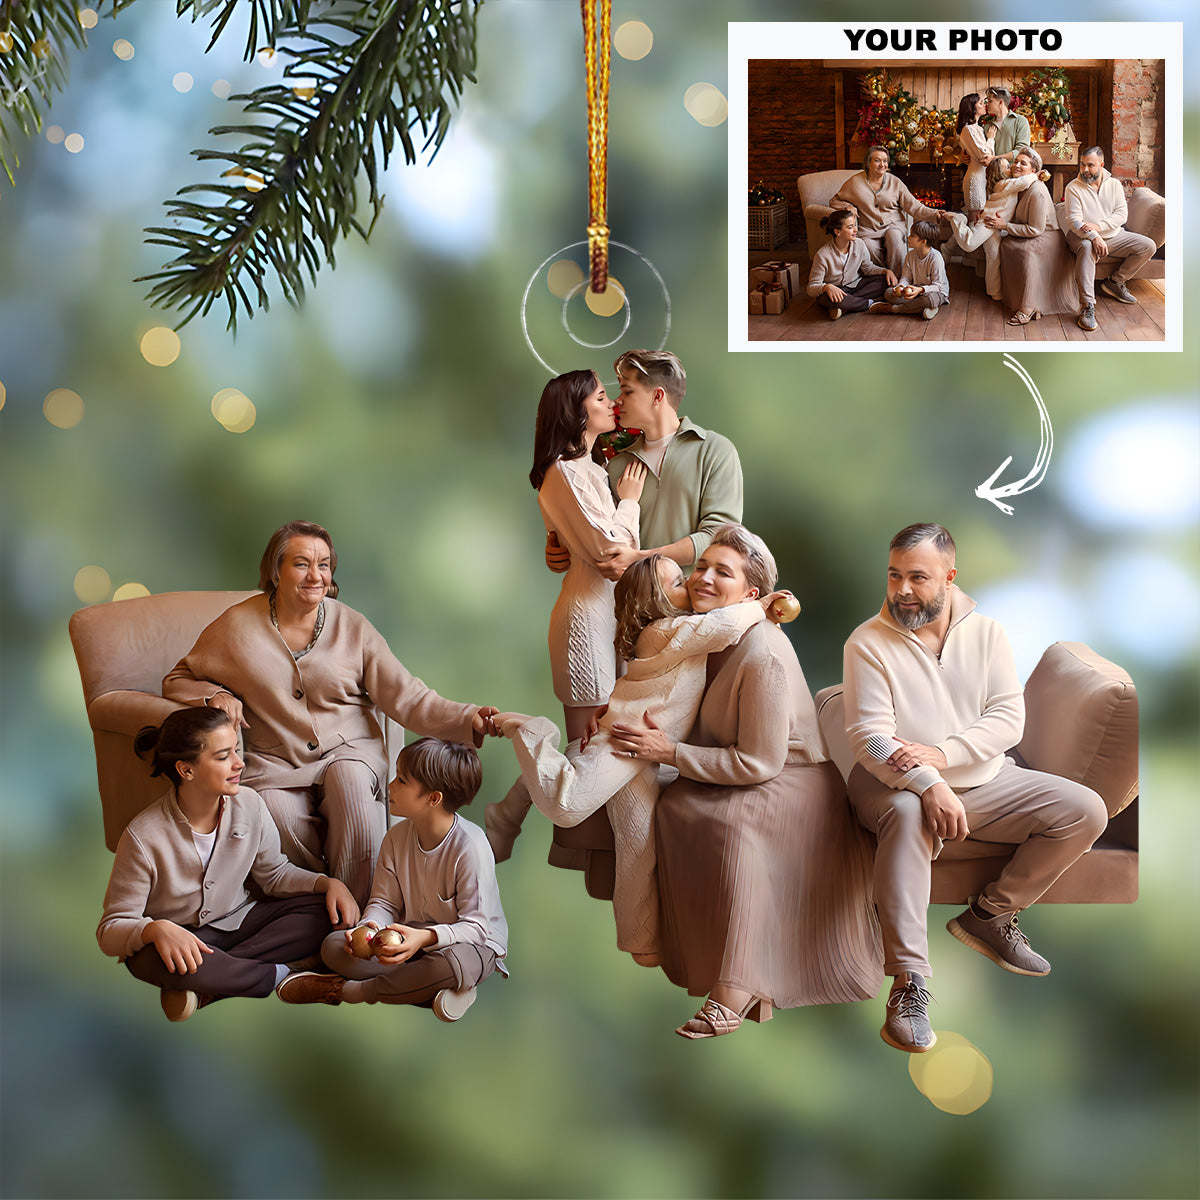 Customized Photo Ornament Special Moment With The Family - Personalized Photo Mica Ornament - Christmas Gift For Family Members